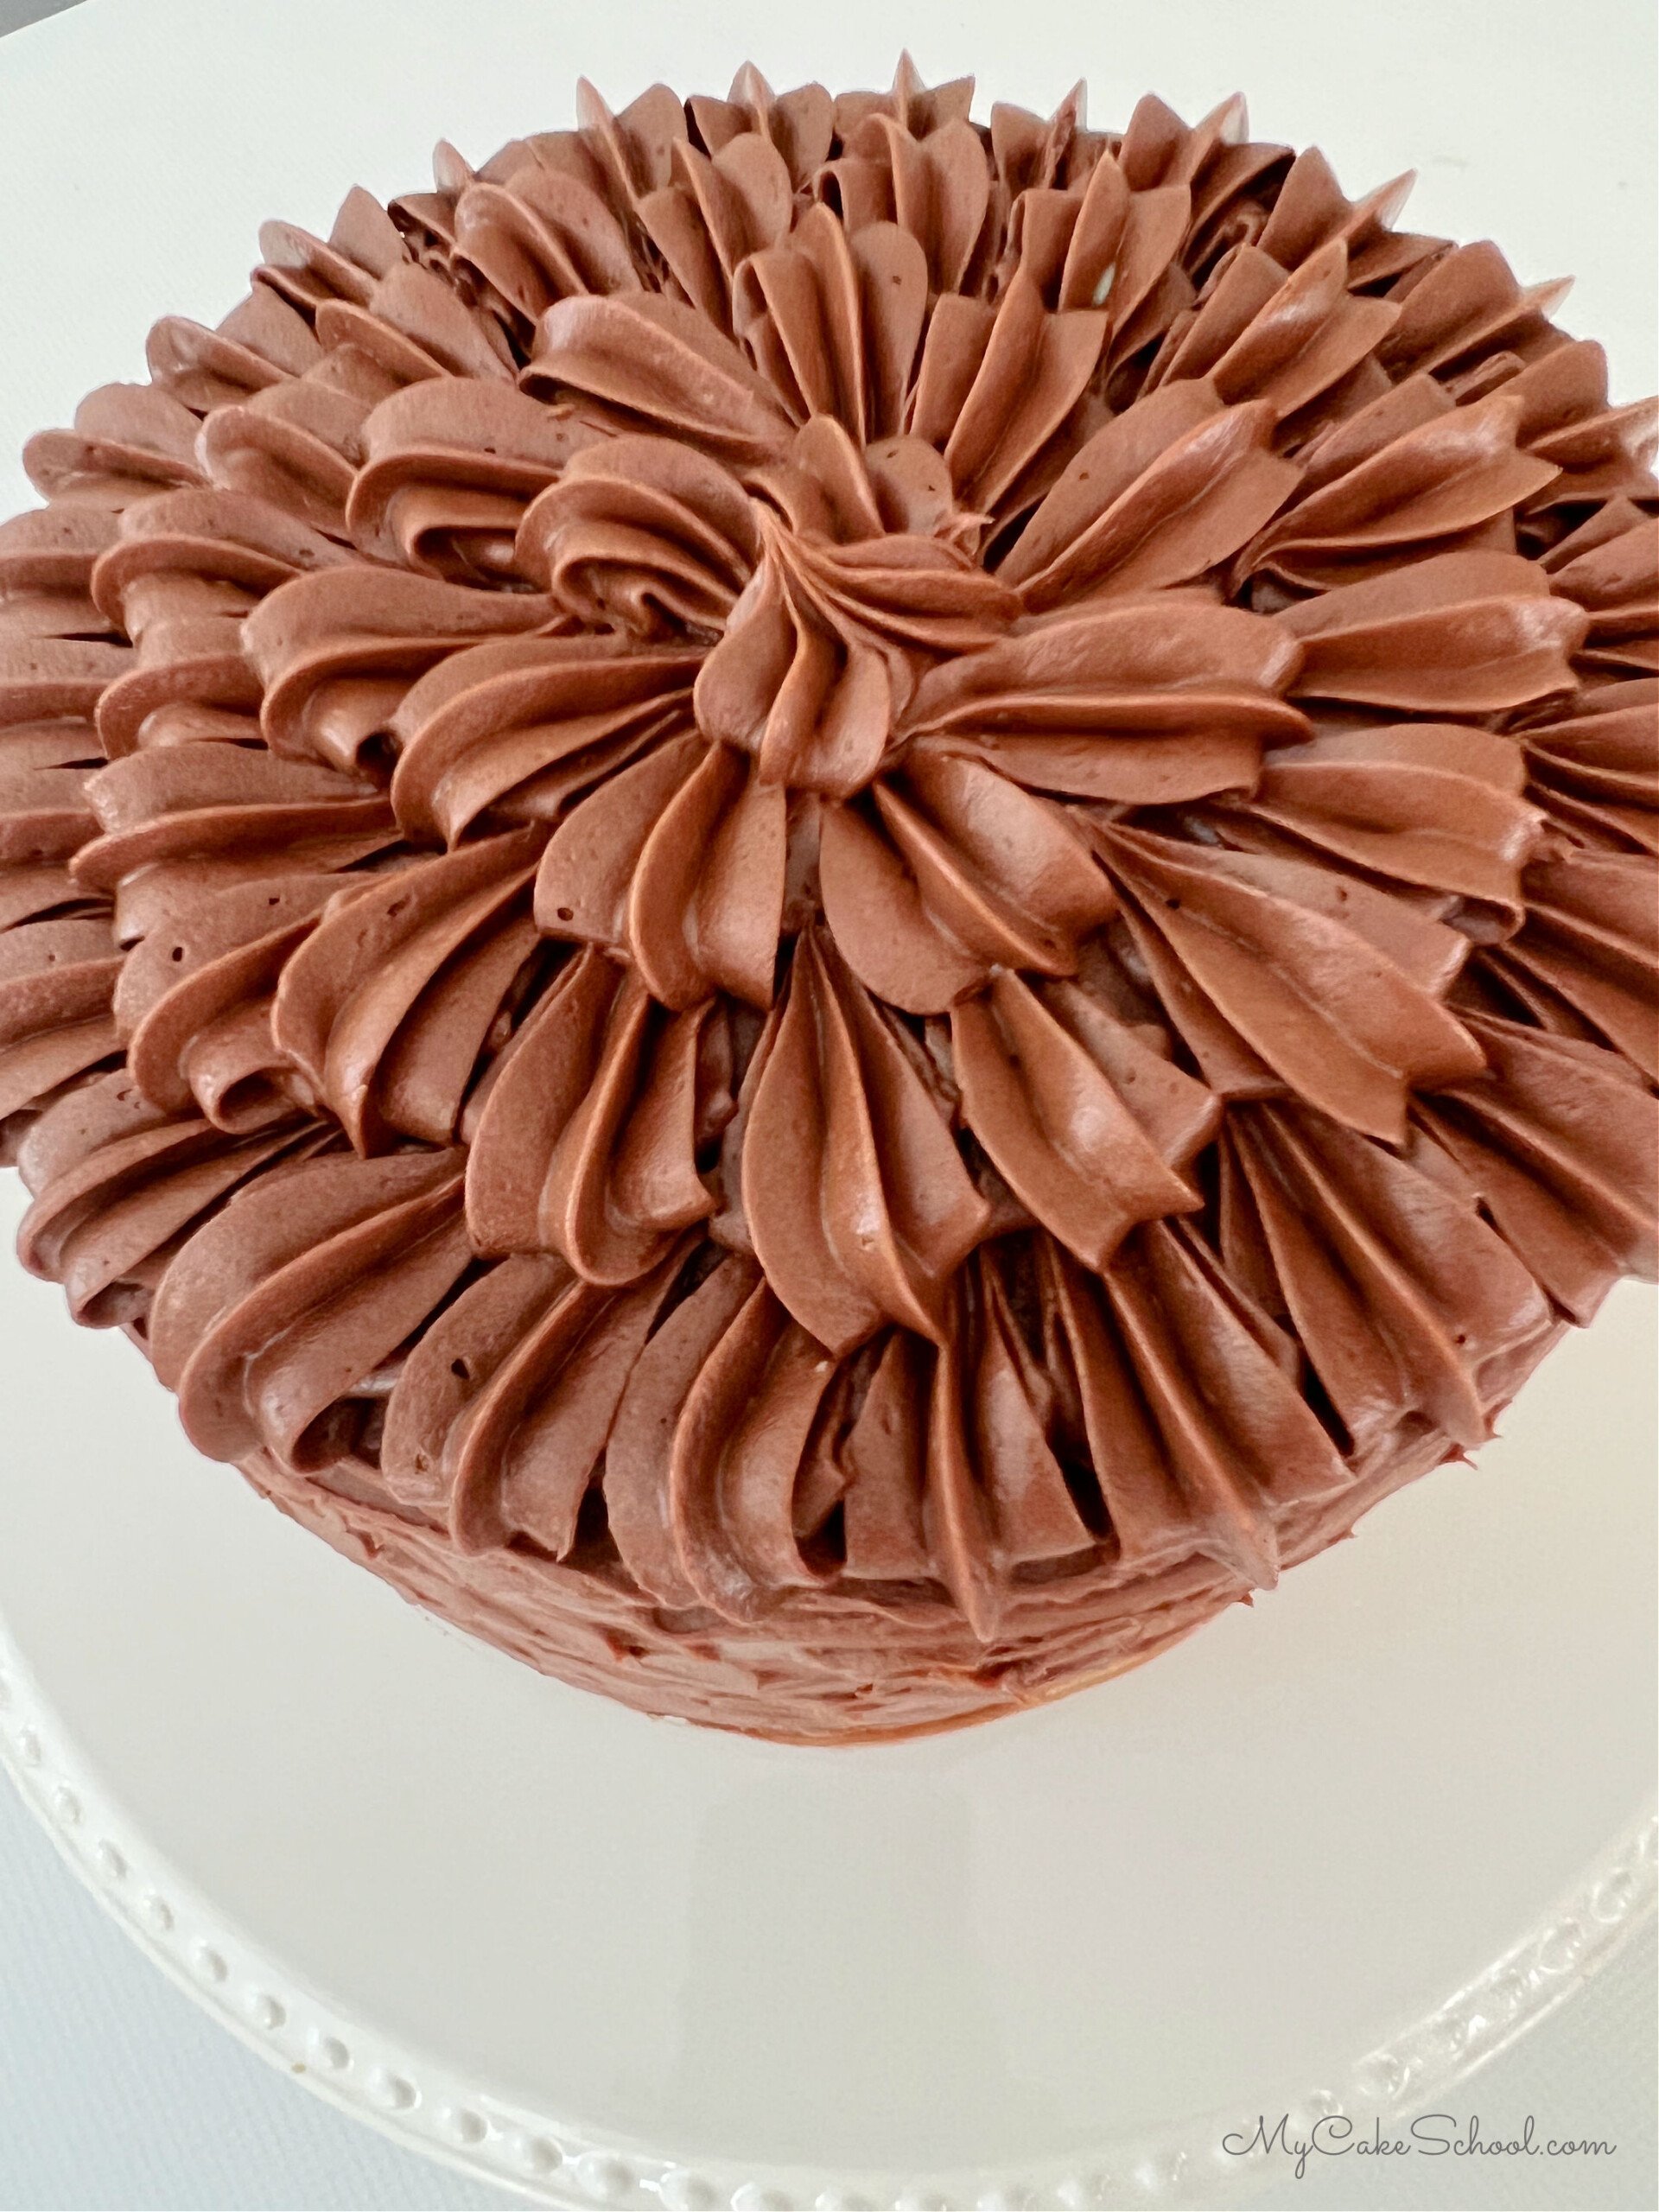 A photo of the top of the decorated cake, filled with rows of chocolate buttercream shells piped with a 1M piping tip.